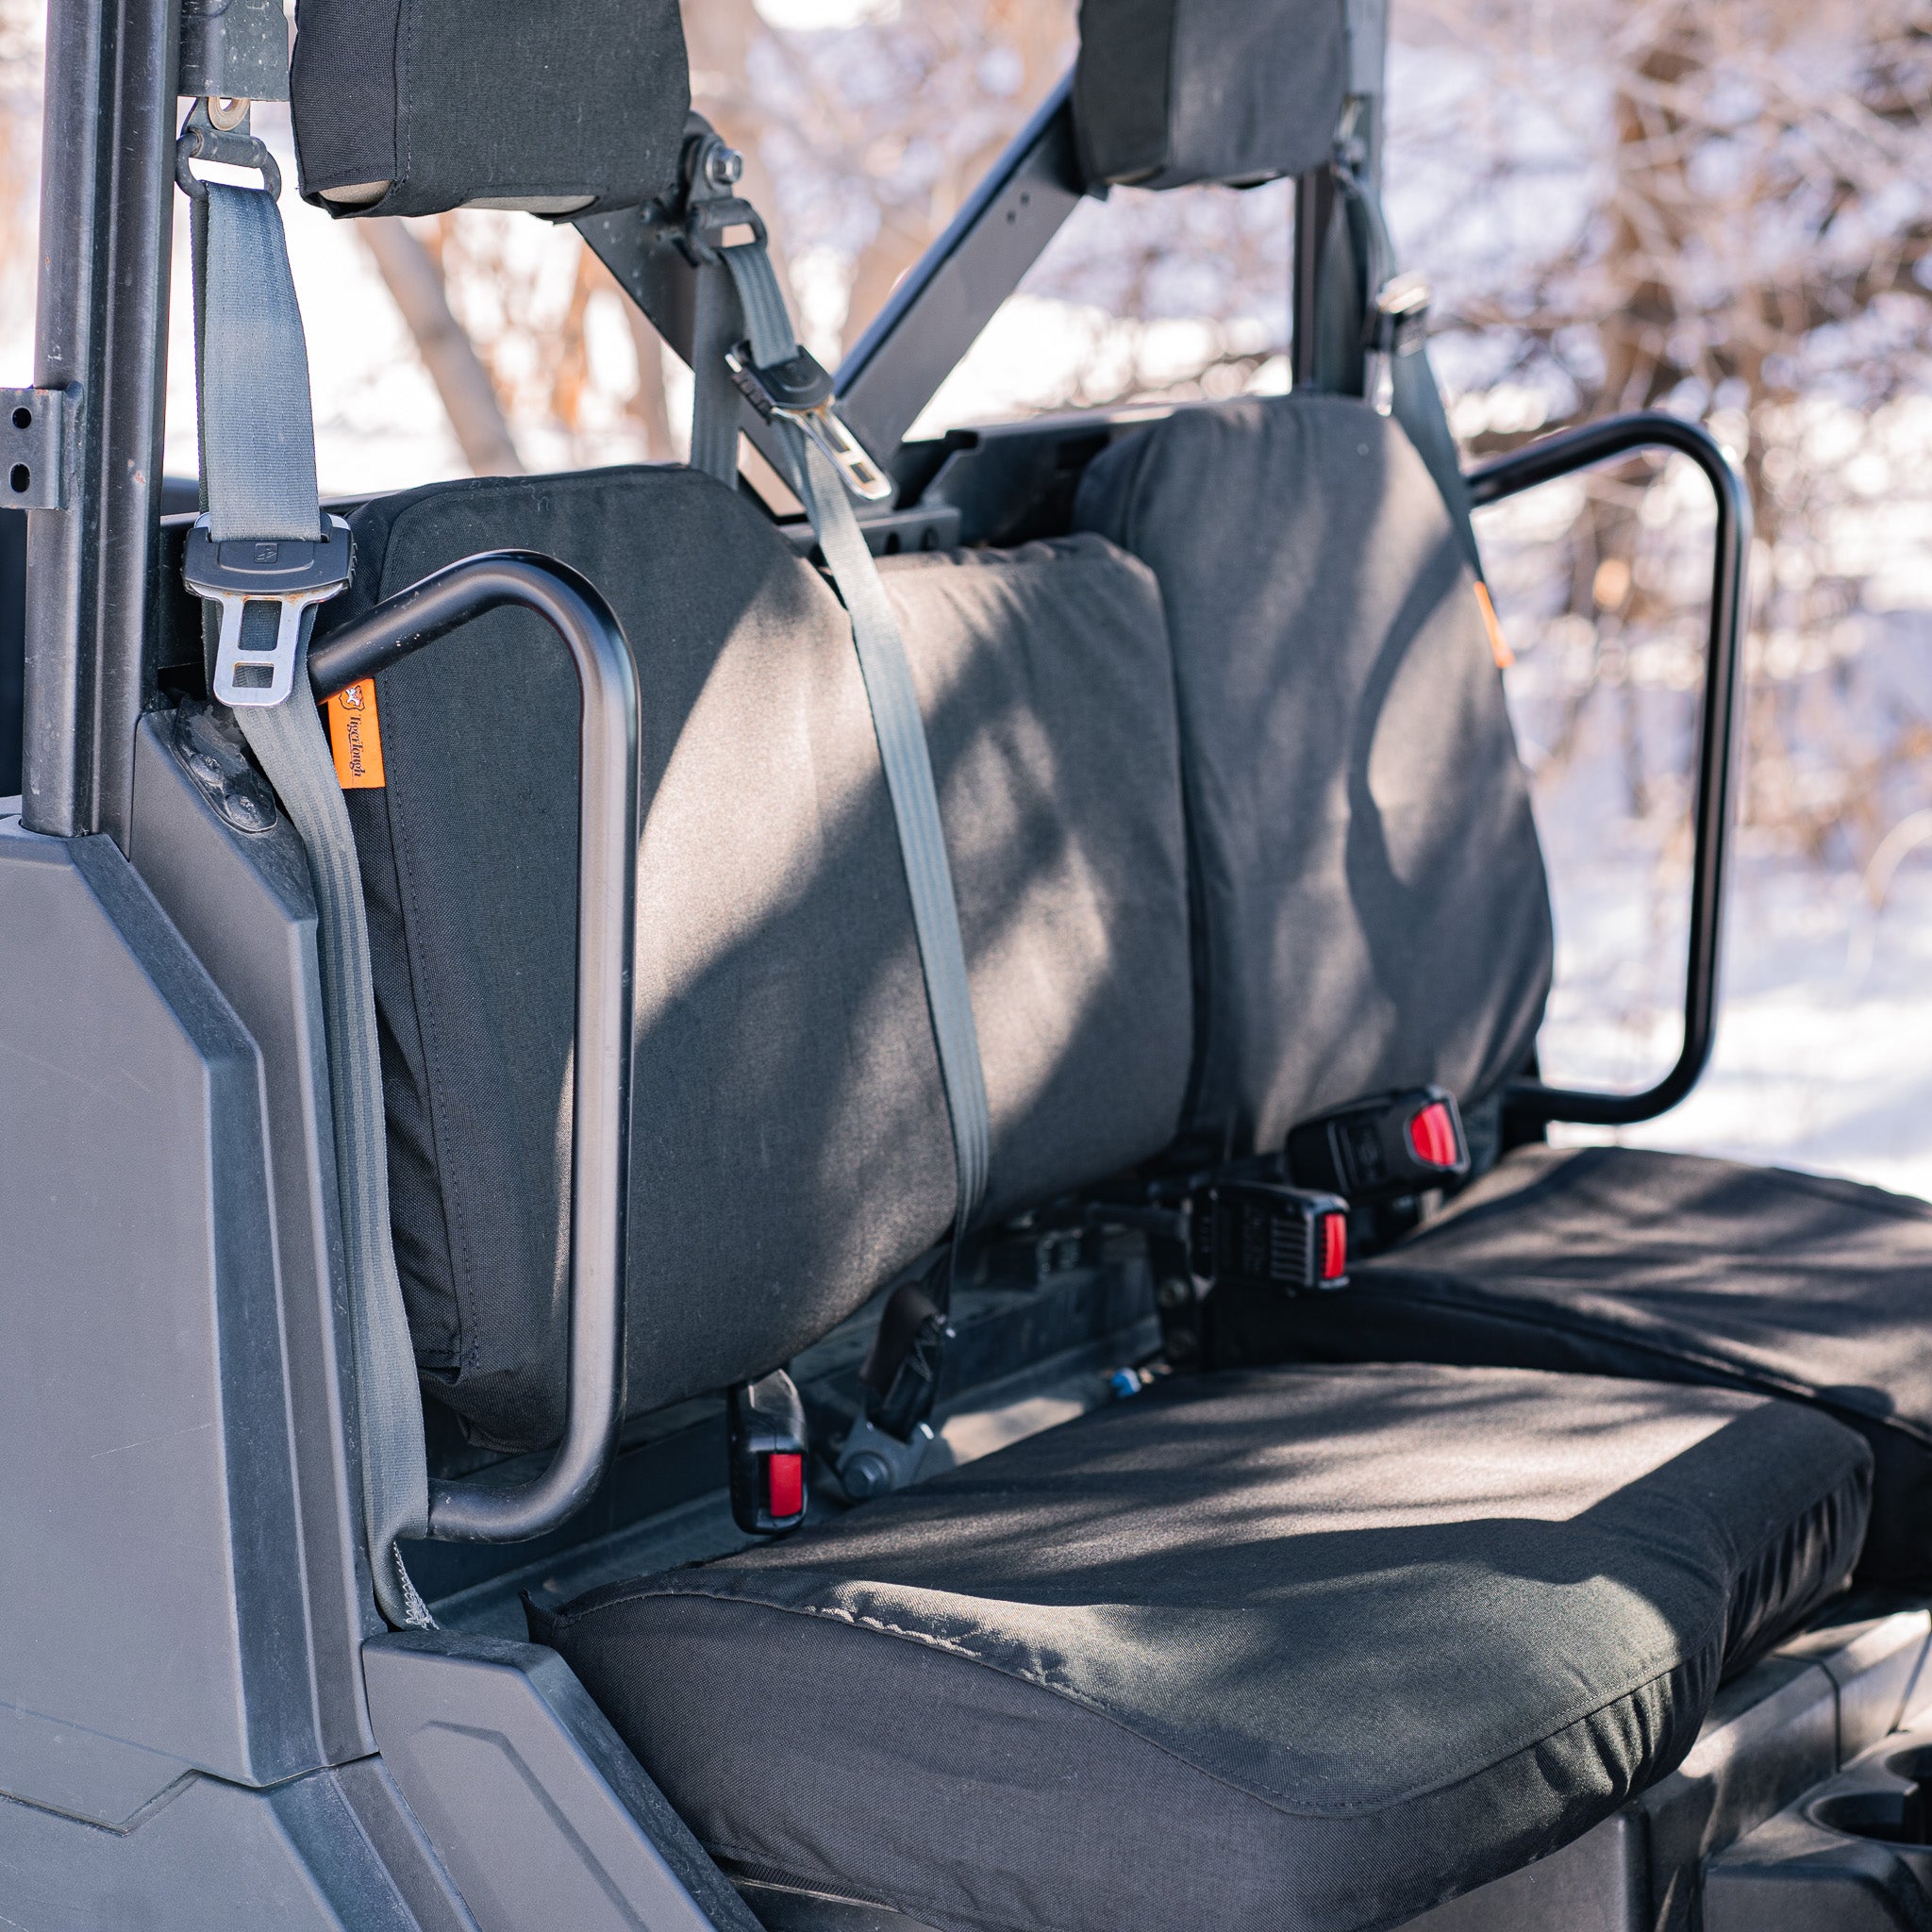 TigerTough seat covers for side-by-sides are made from 1000 denier Cordura fabric, which is a supple but extremely durable fabric.